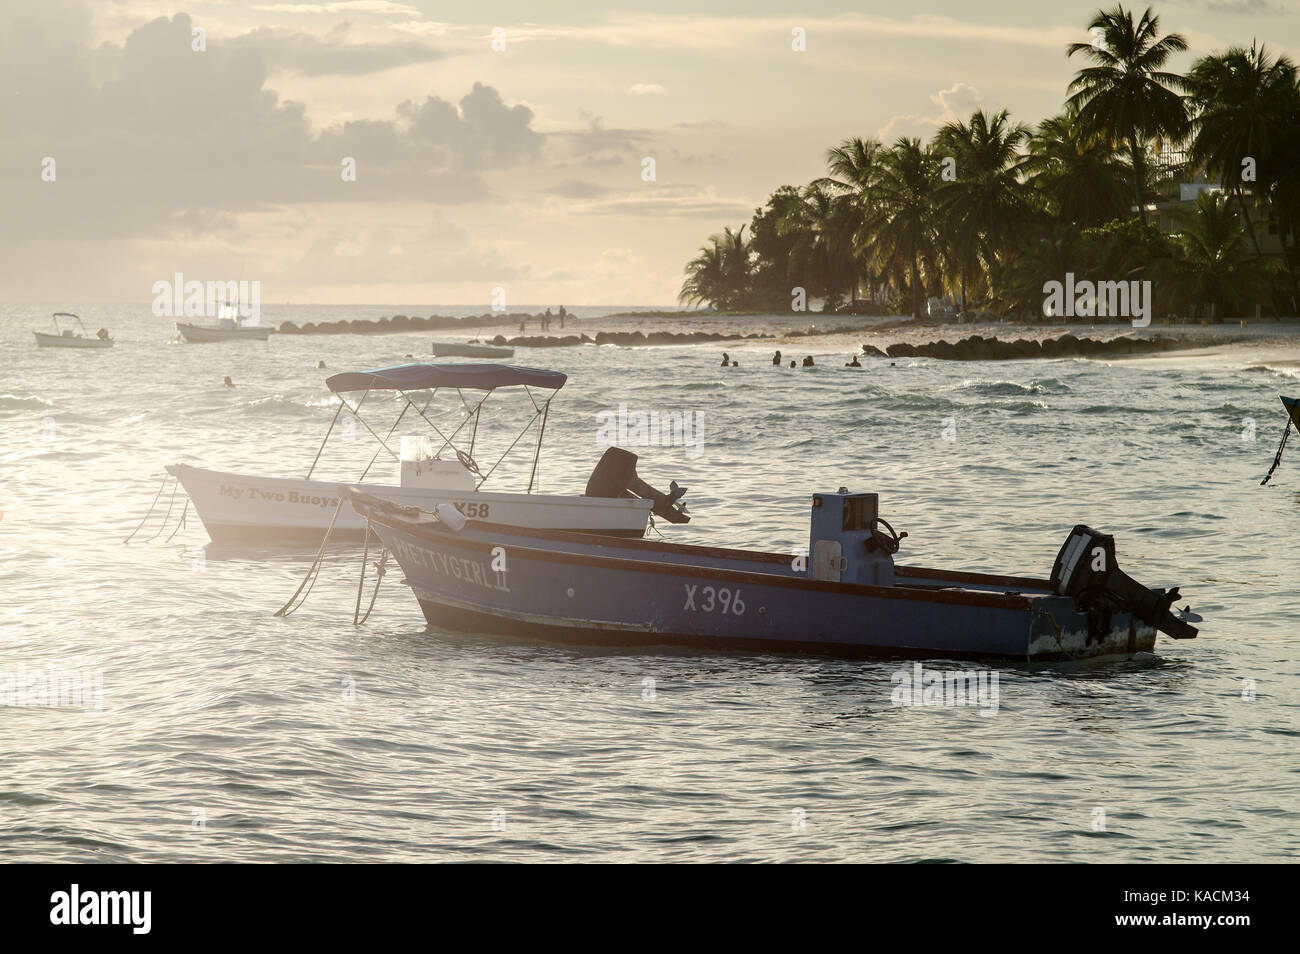 Sun setting behind fishing boats moored in St. Laurence Gap on the west coast of Barbados Stock Photo